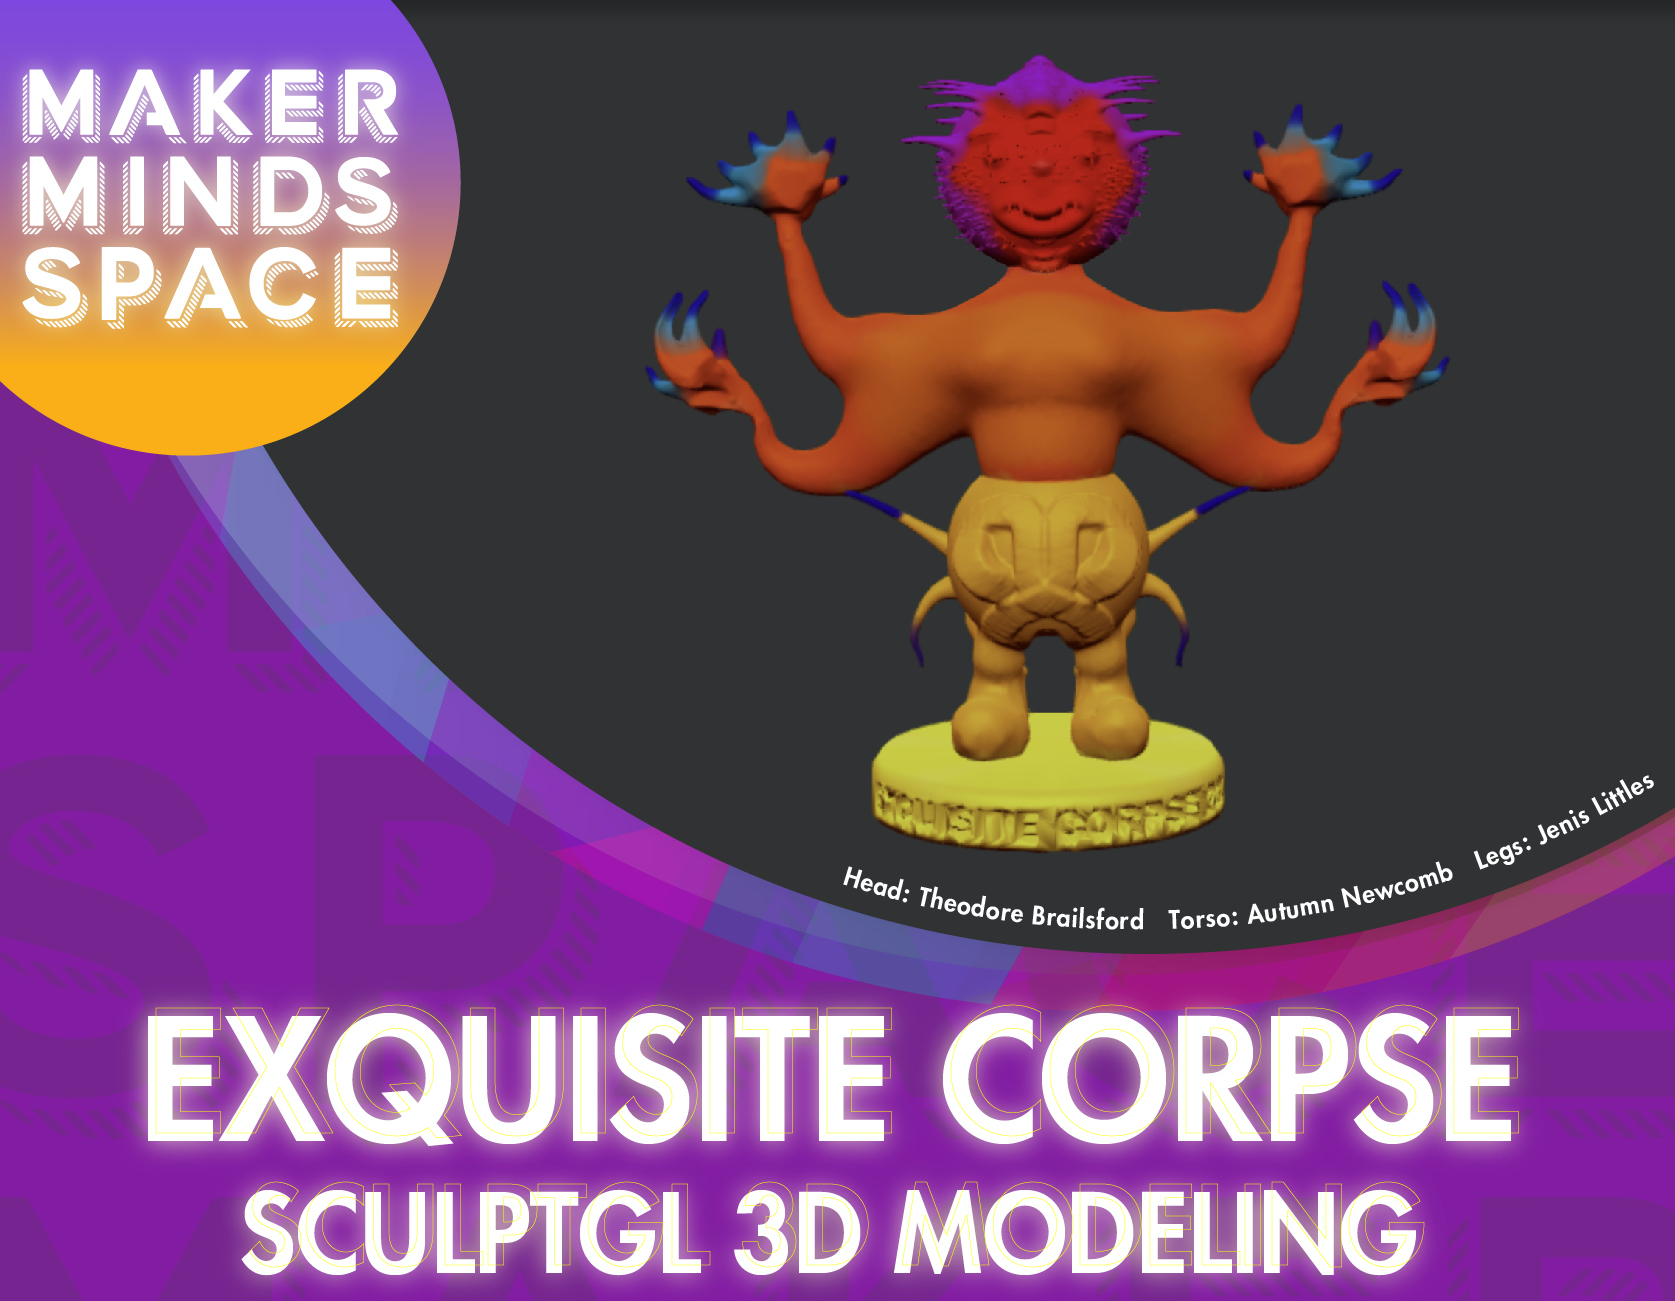 MakerMinds Space Exquisite Corpse 3D Modeling poster